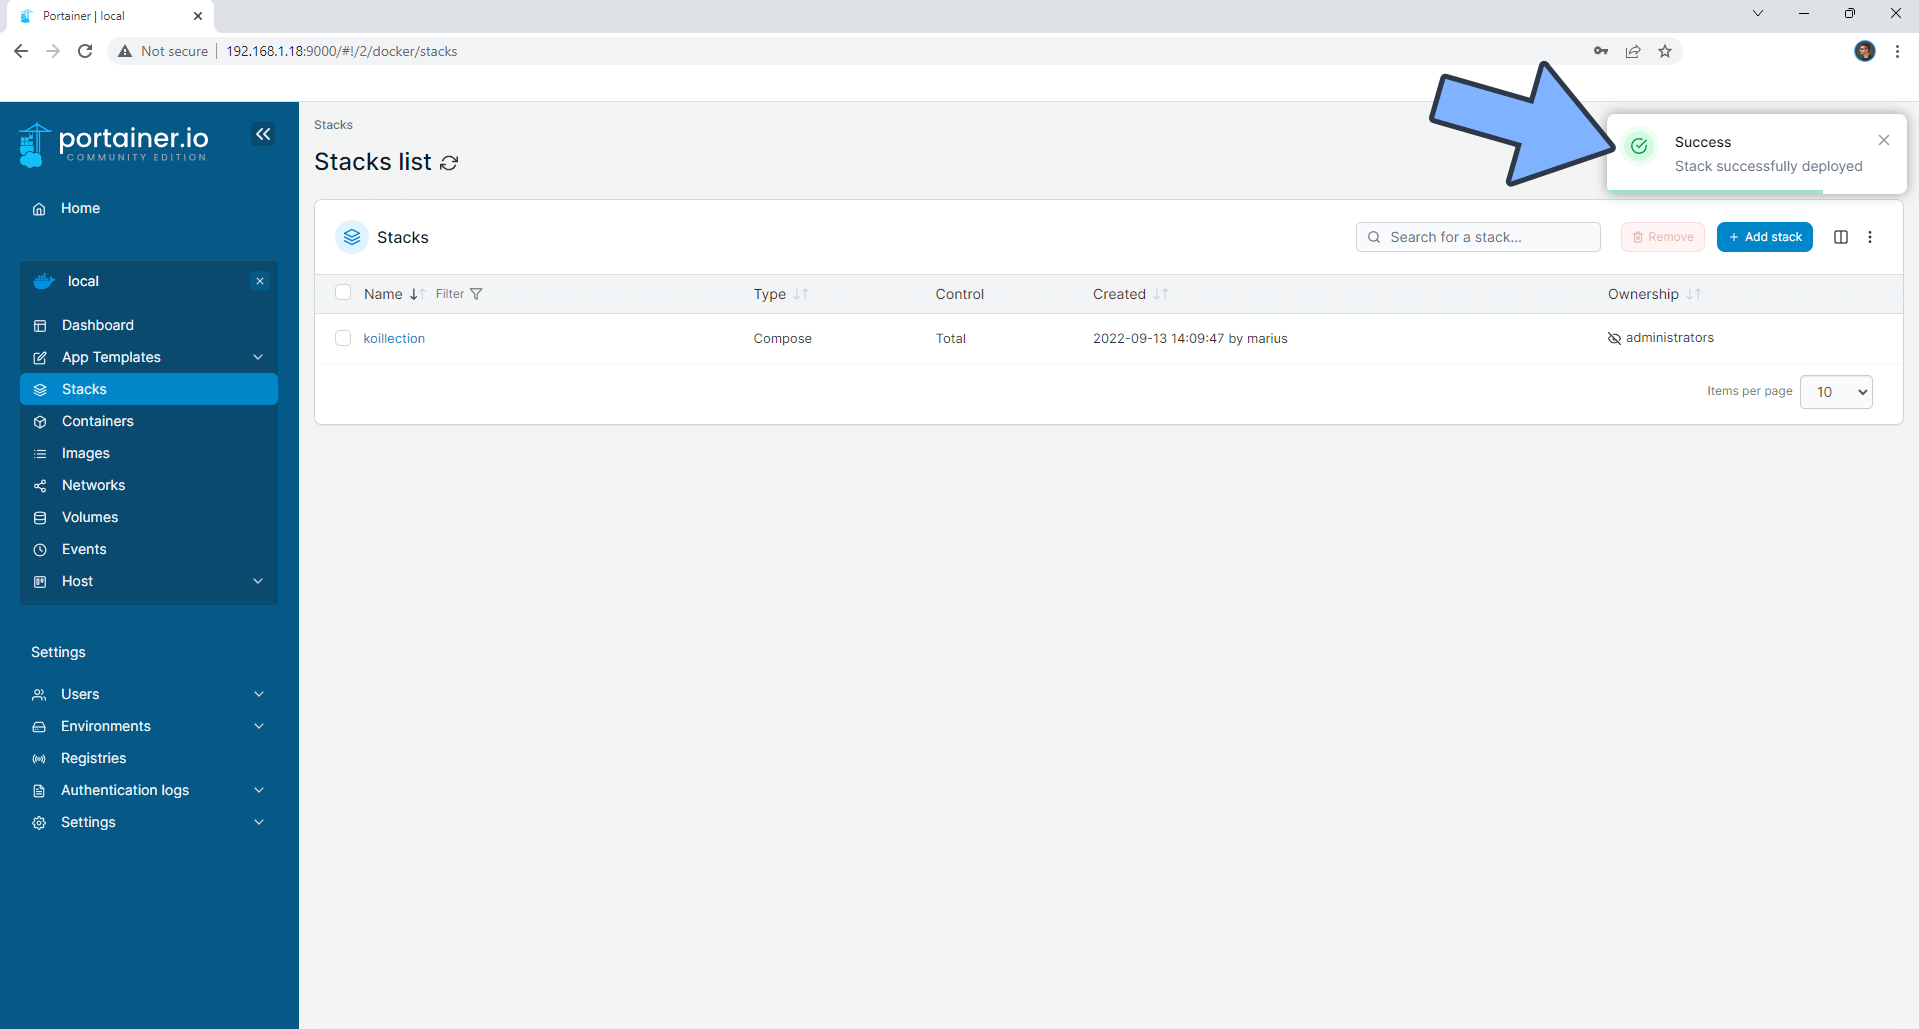 3 Koillection Synology NAS Set up